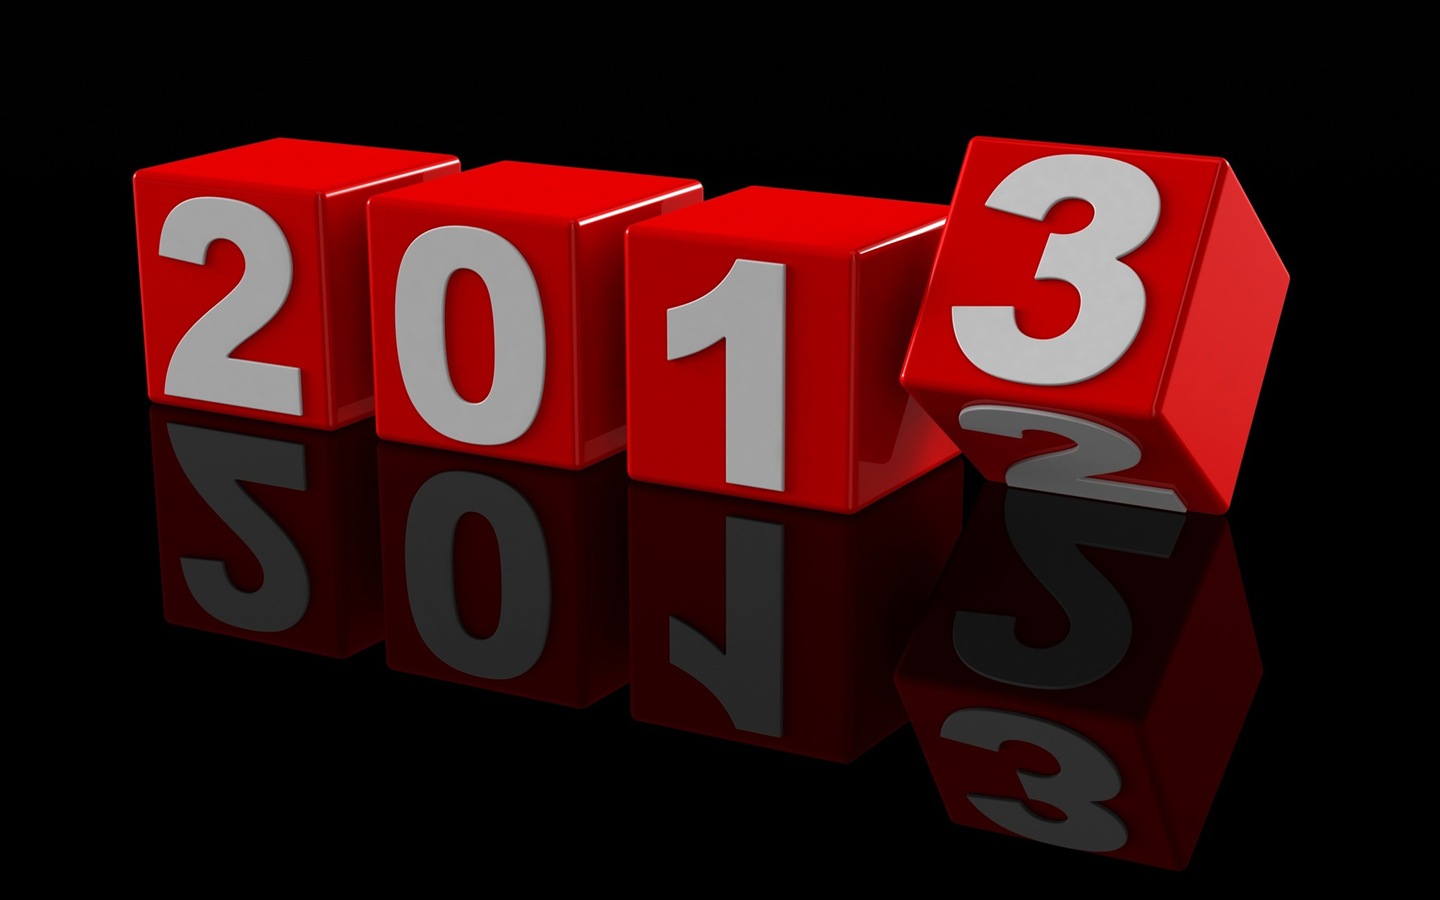 2013 Happy New Year HD wallpapers #10 - 1440x900